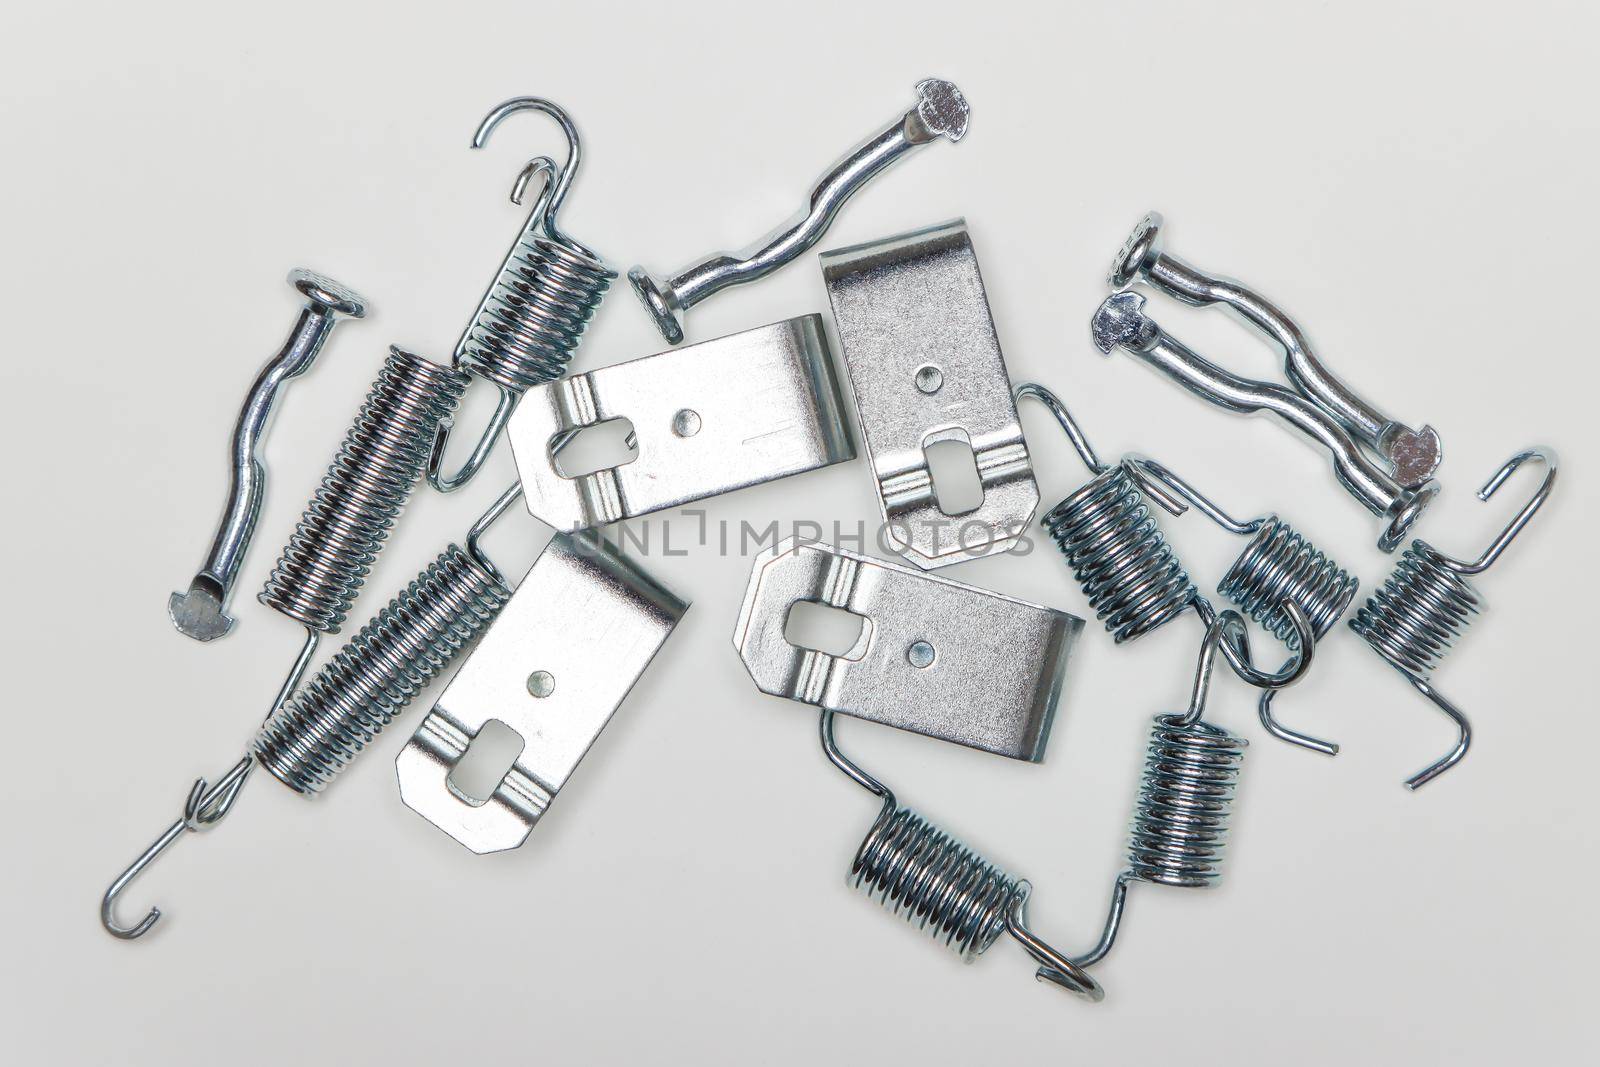 Metal fingers, plates, springs on the table, parts for car repair. A set of spare parts for servicing vehicle calipers. Details on white background, copy space available.